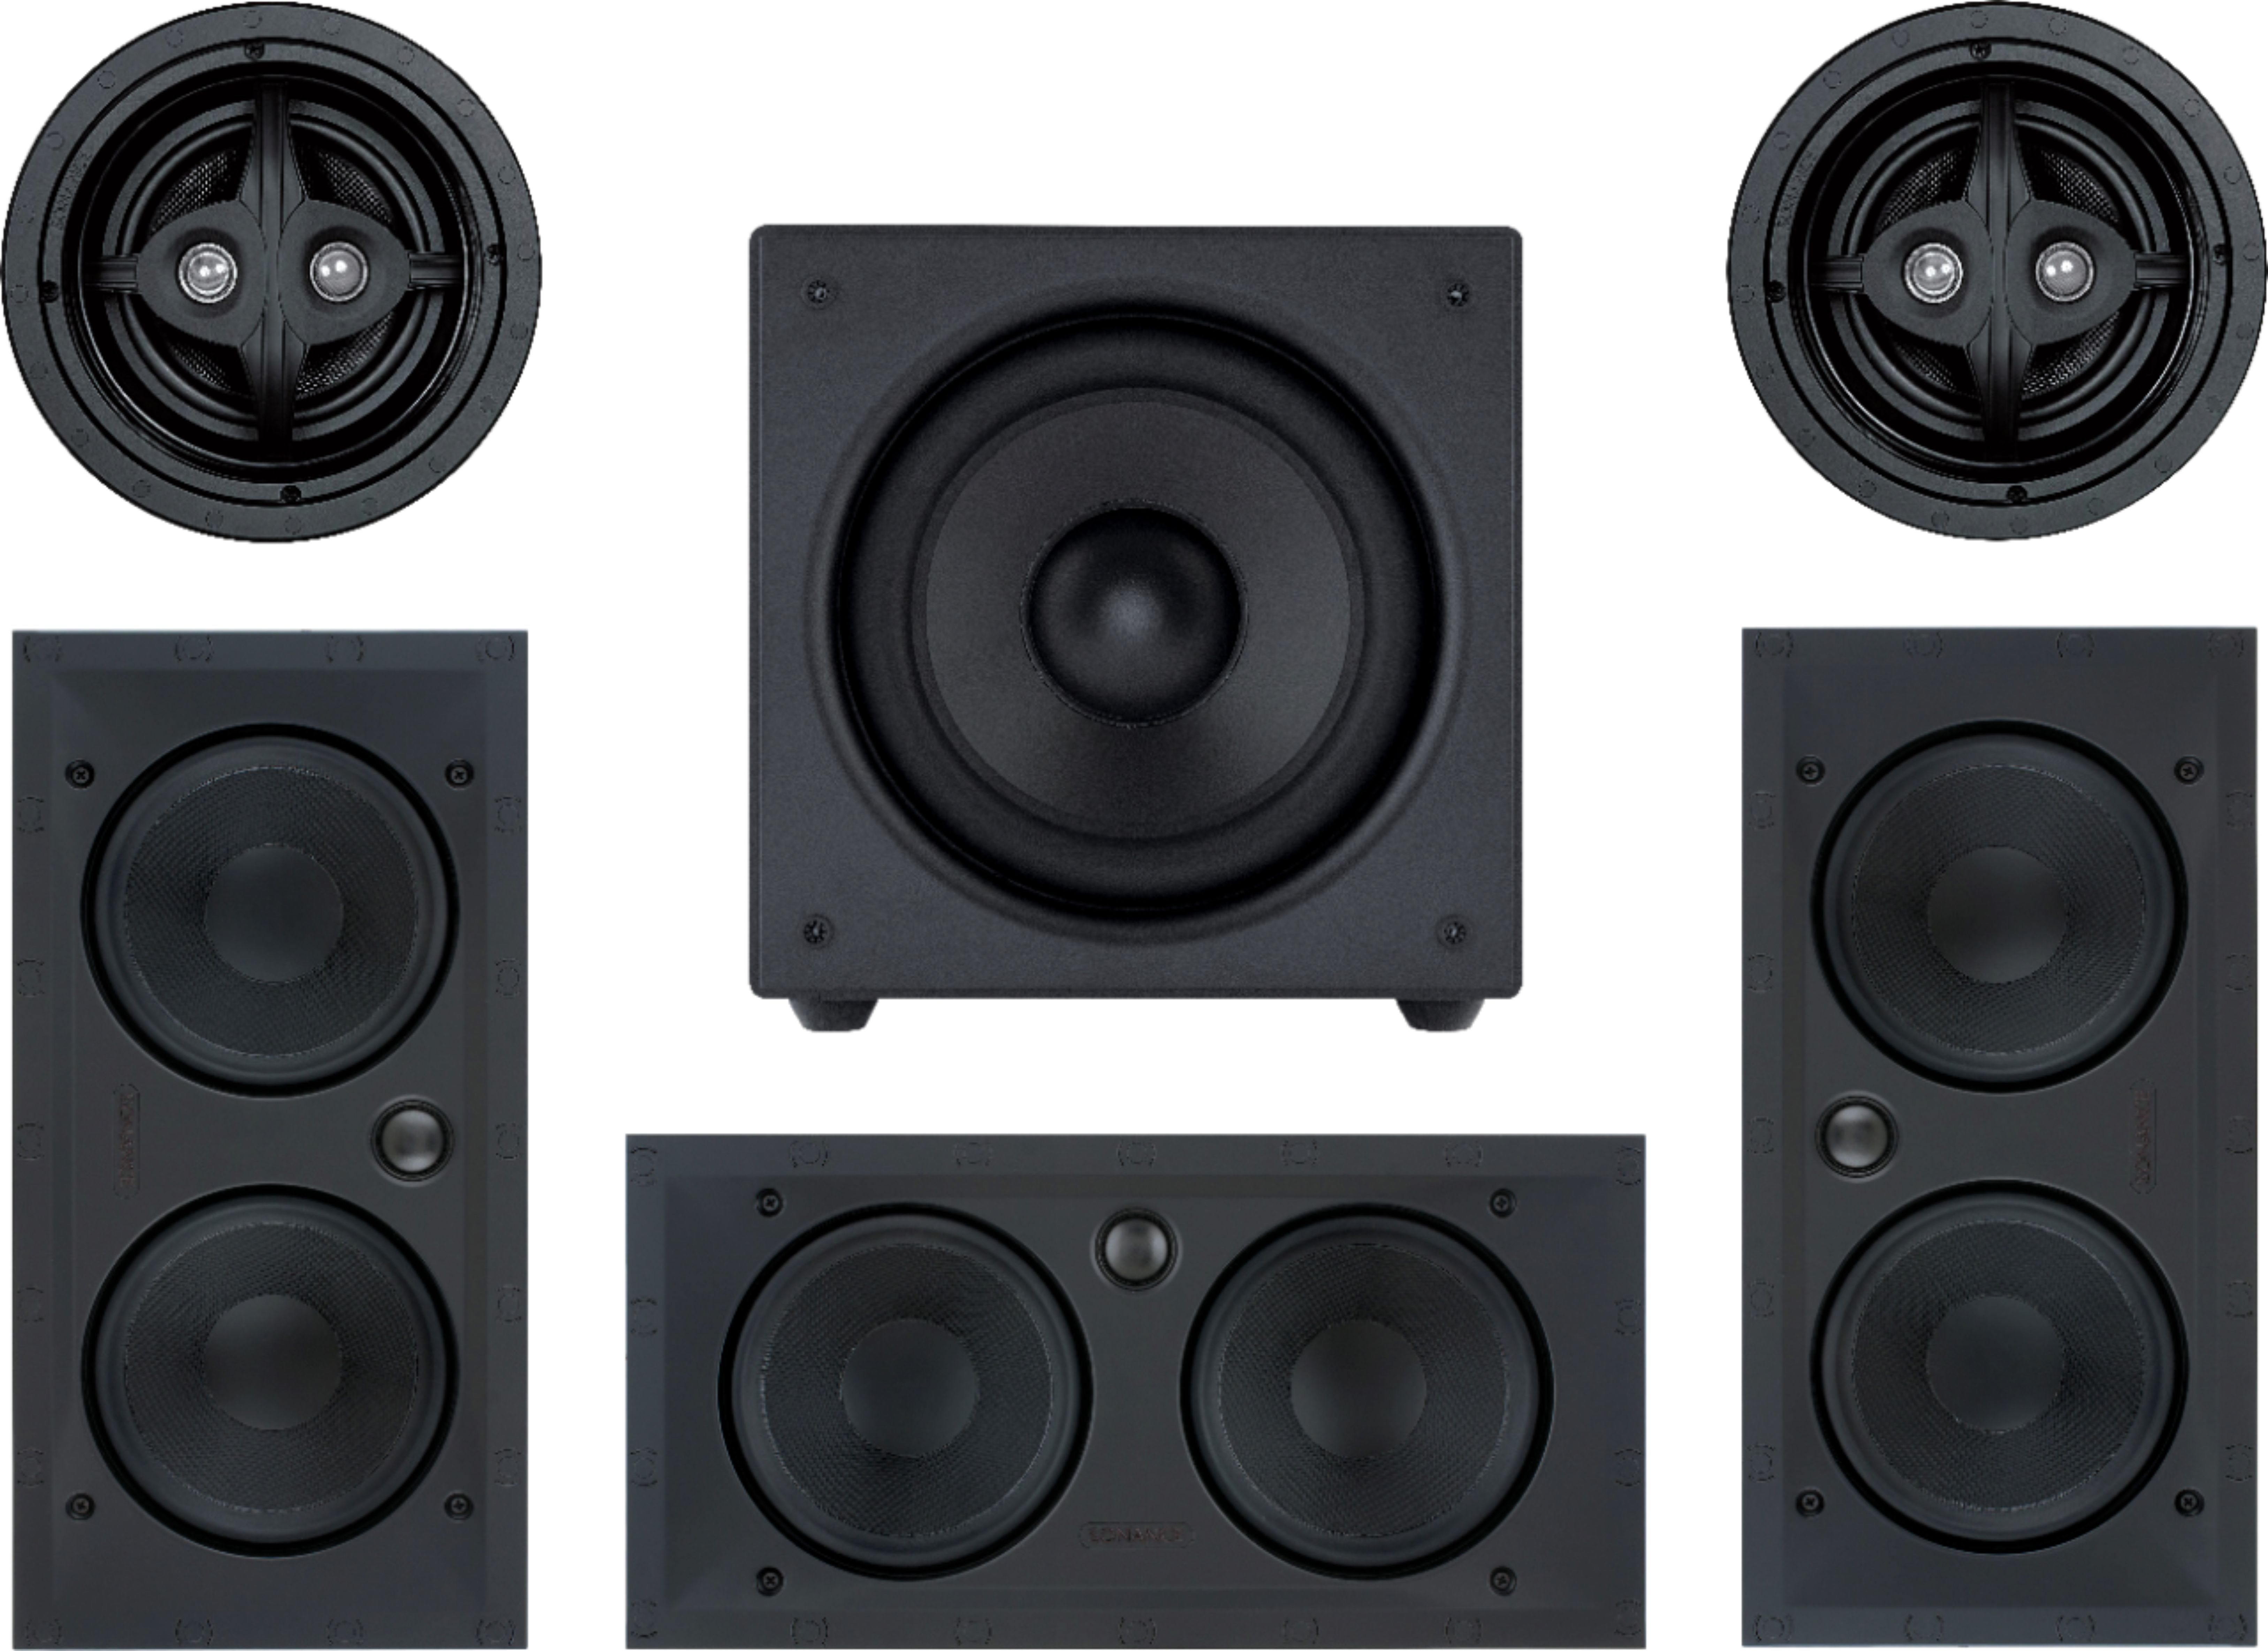 Sonance MAG5.1 Premium 61/2" InWall Speaker System with Wireless Subwoofer Paintable White